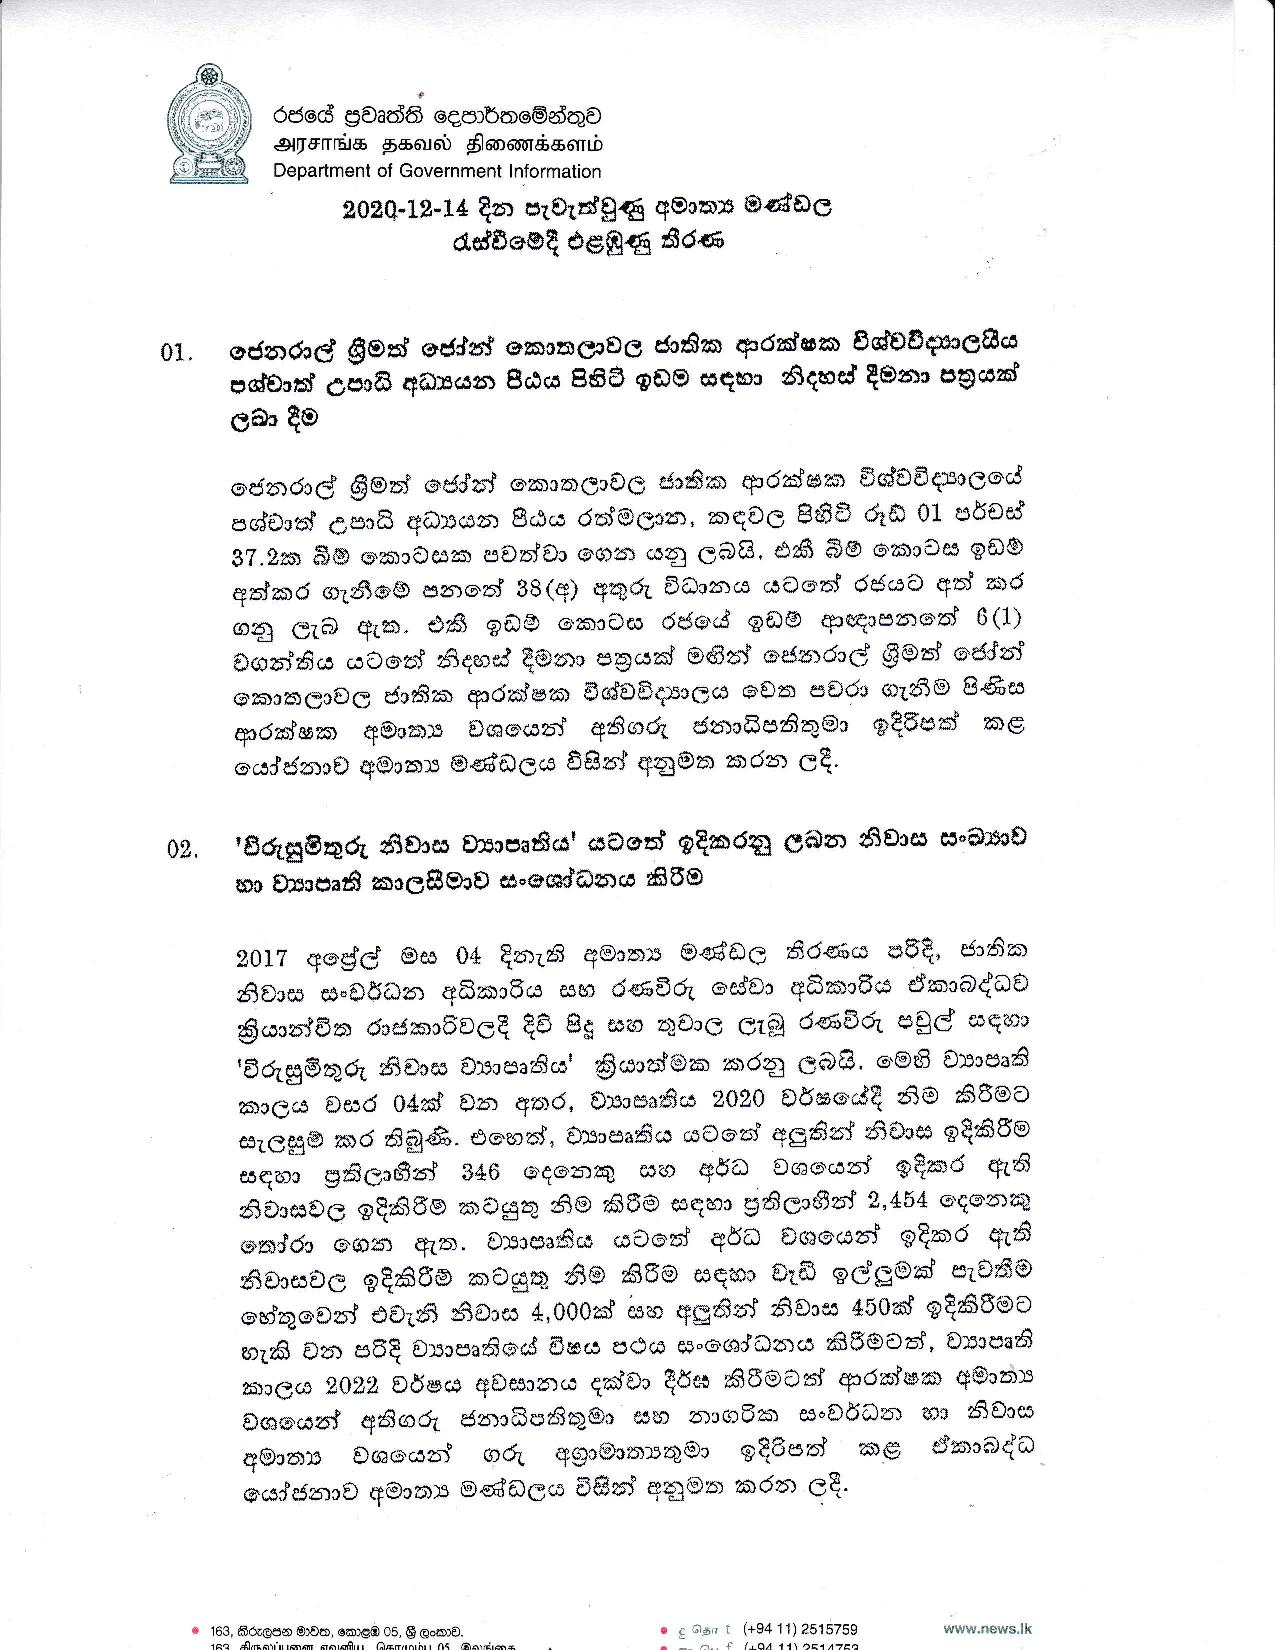 Cabinet Decision on 14.12.2020 page 001